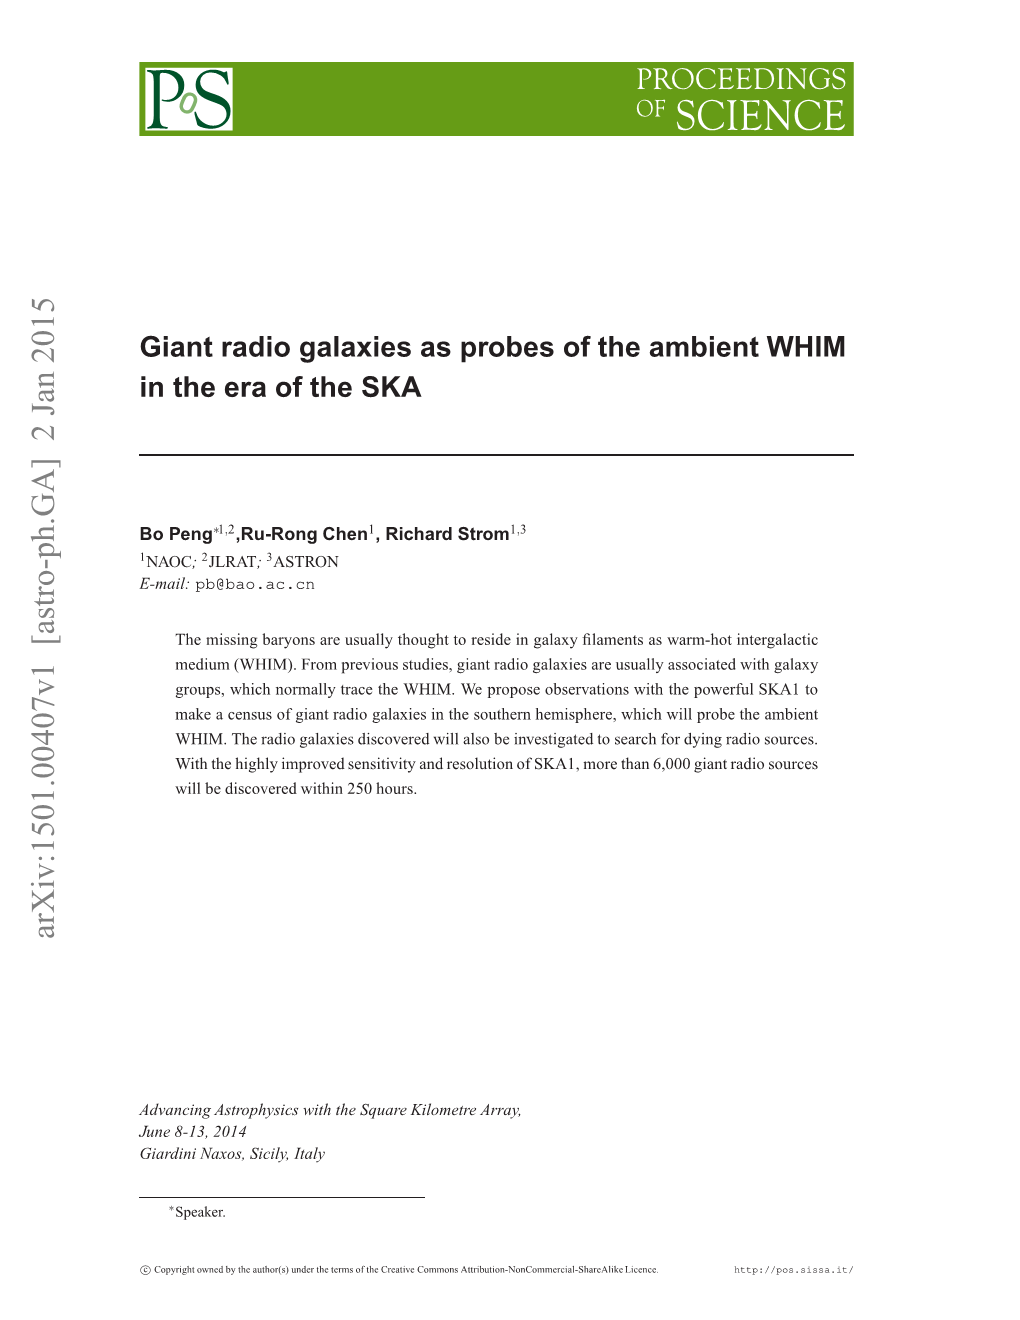 Giant Radio Galaxies As Probes of the Ambient WHIM in the Era of The